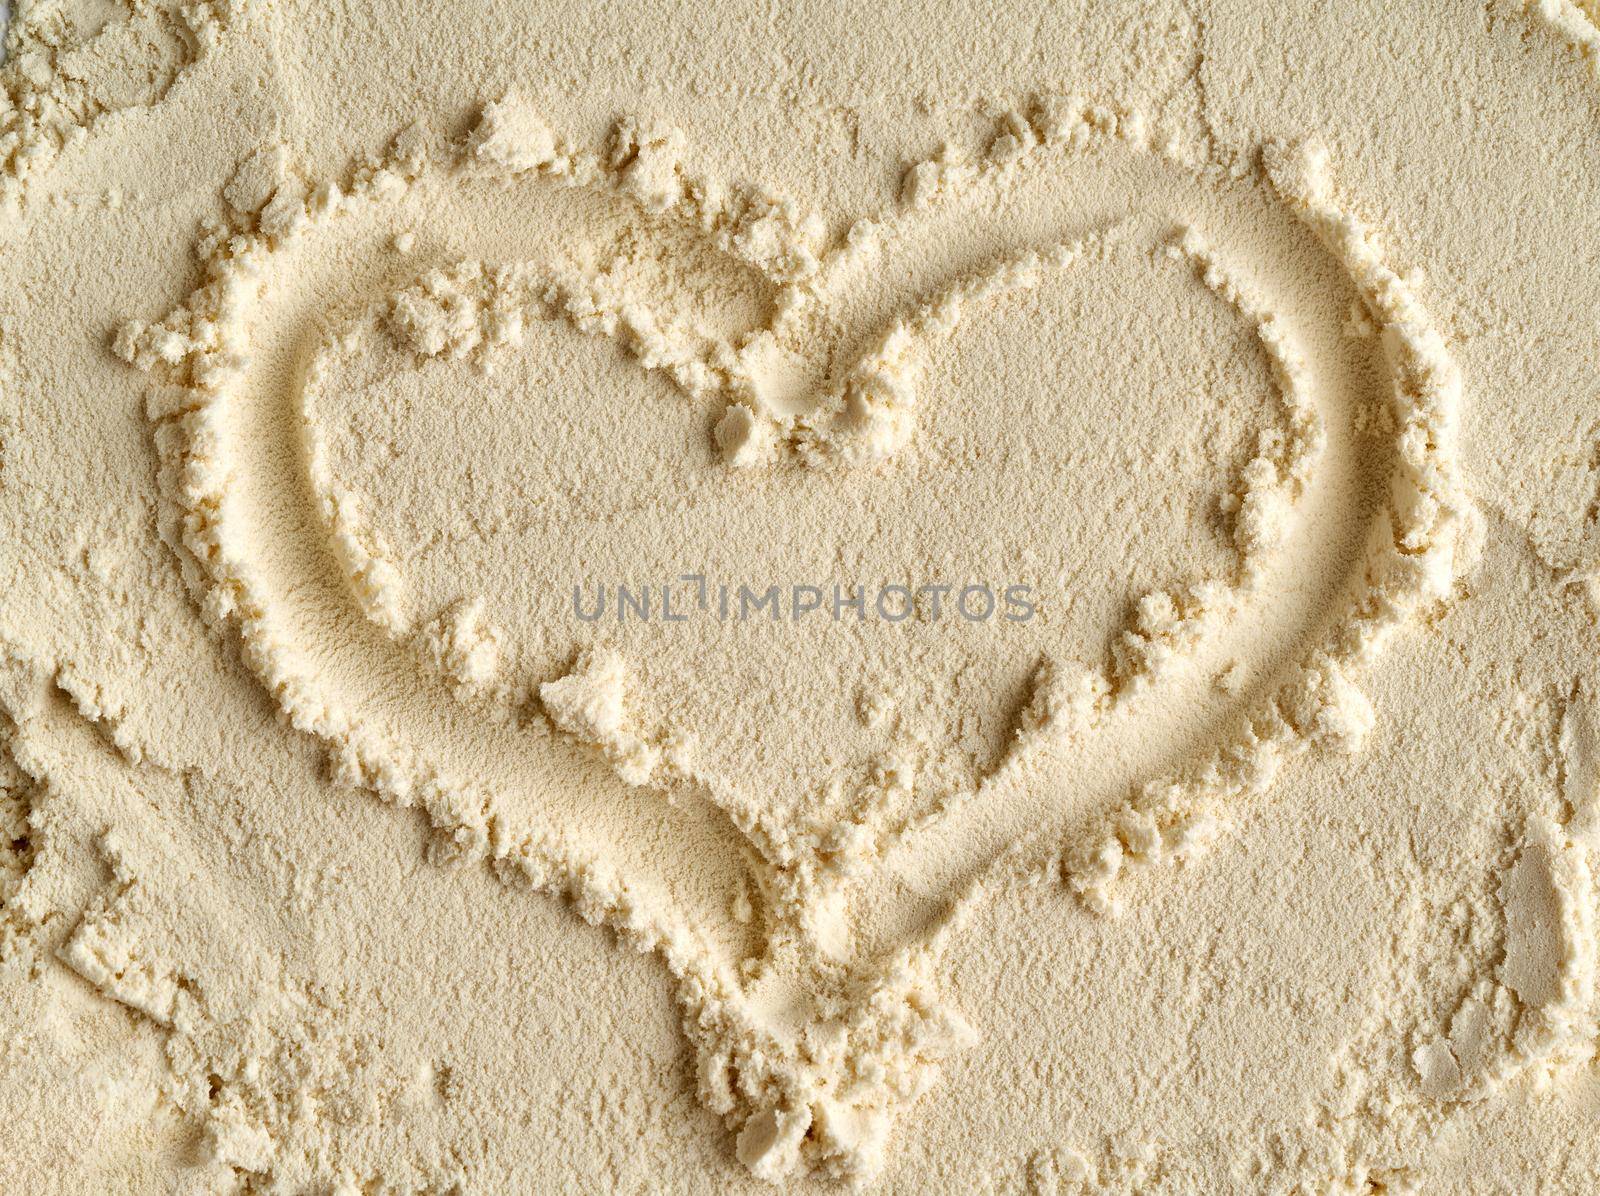 Heart shape made of whey protein powder, top view